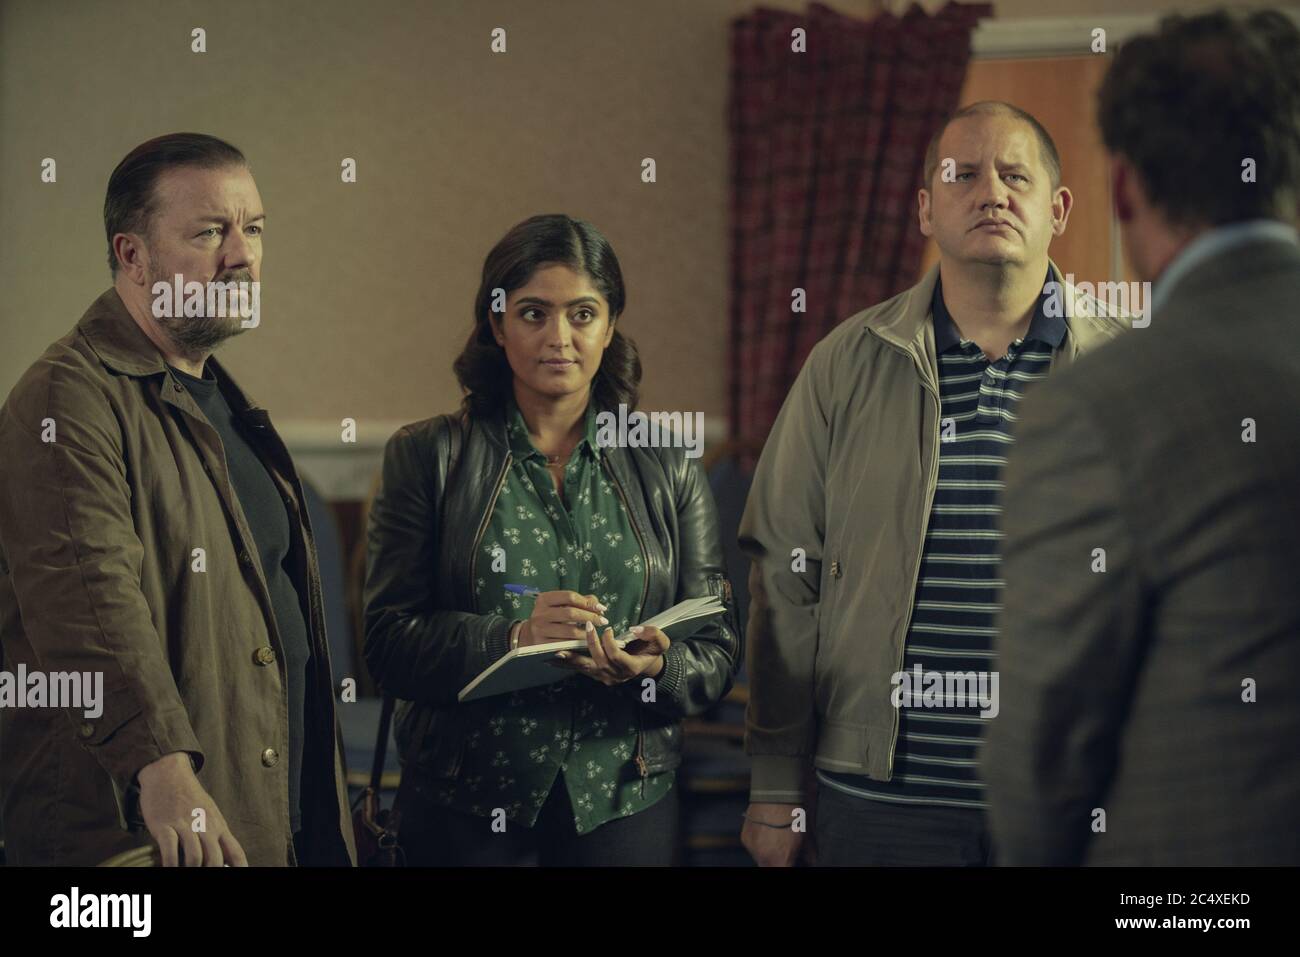 Ricky Gervais, Mandeep Dhillon, Tony Way, 'After Life' Staffel 2 (2020) Credit: Natalie Seery / Netflix / The Hollywood Archive Stockfoto